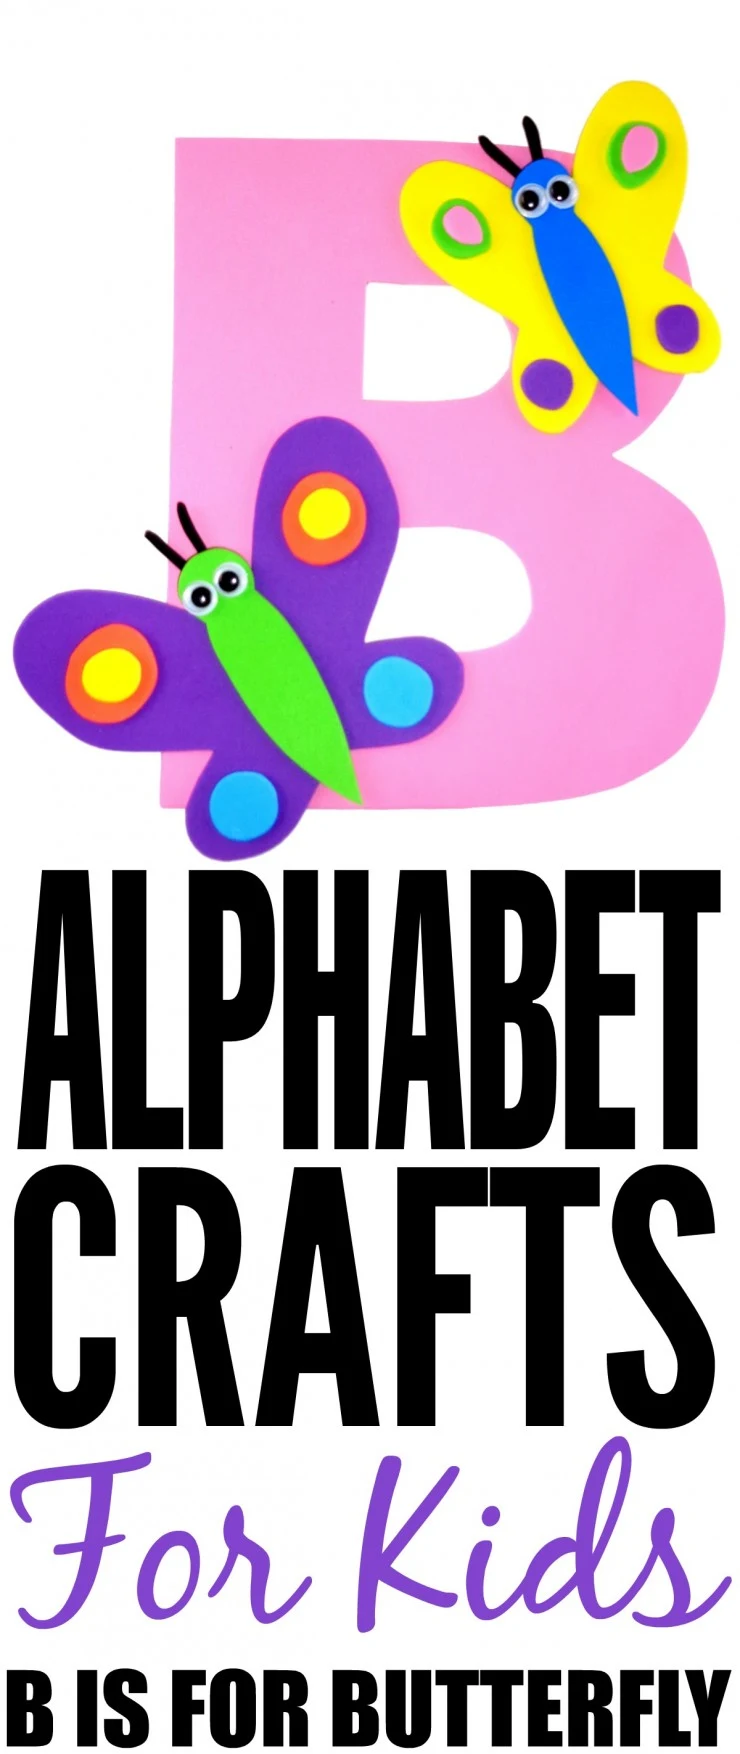 This week is my series of ABCs kids crafts featuring the Alphabet, we are doing a B is for Butterfly craft. These Alphabet Crafts For Kids are a fun way to introduce your child to the alphabet.